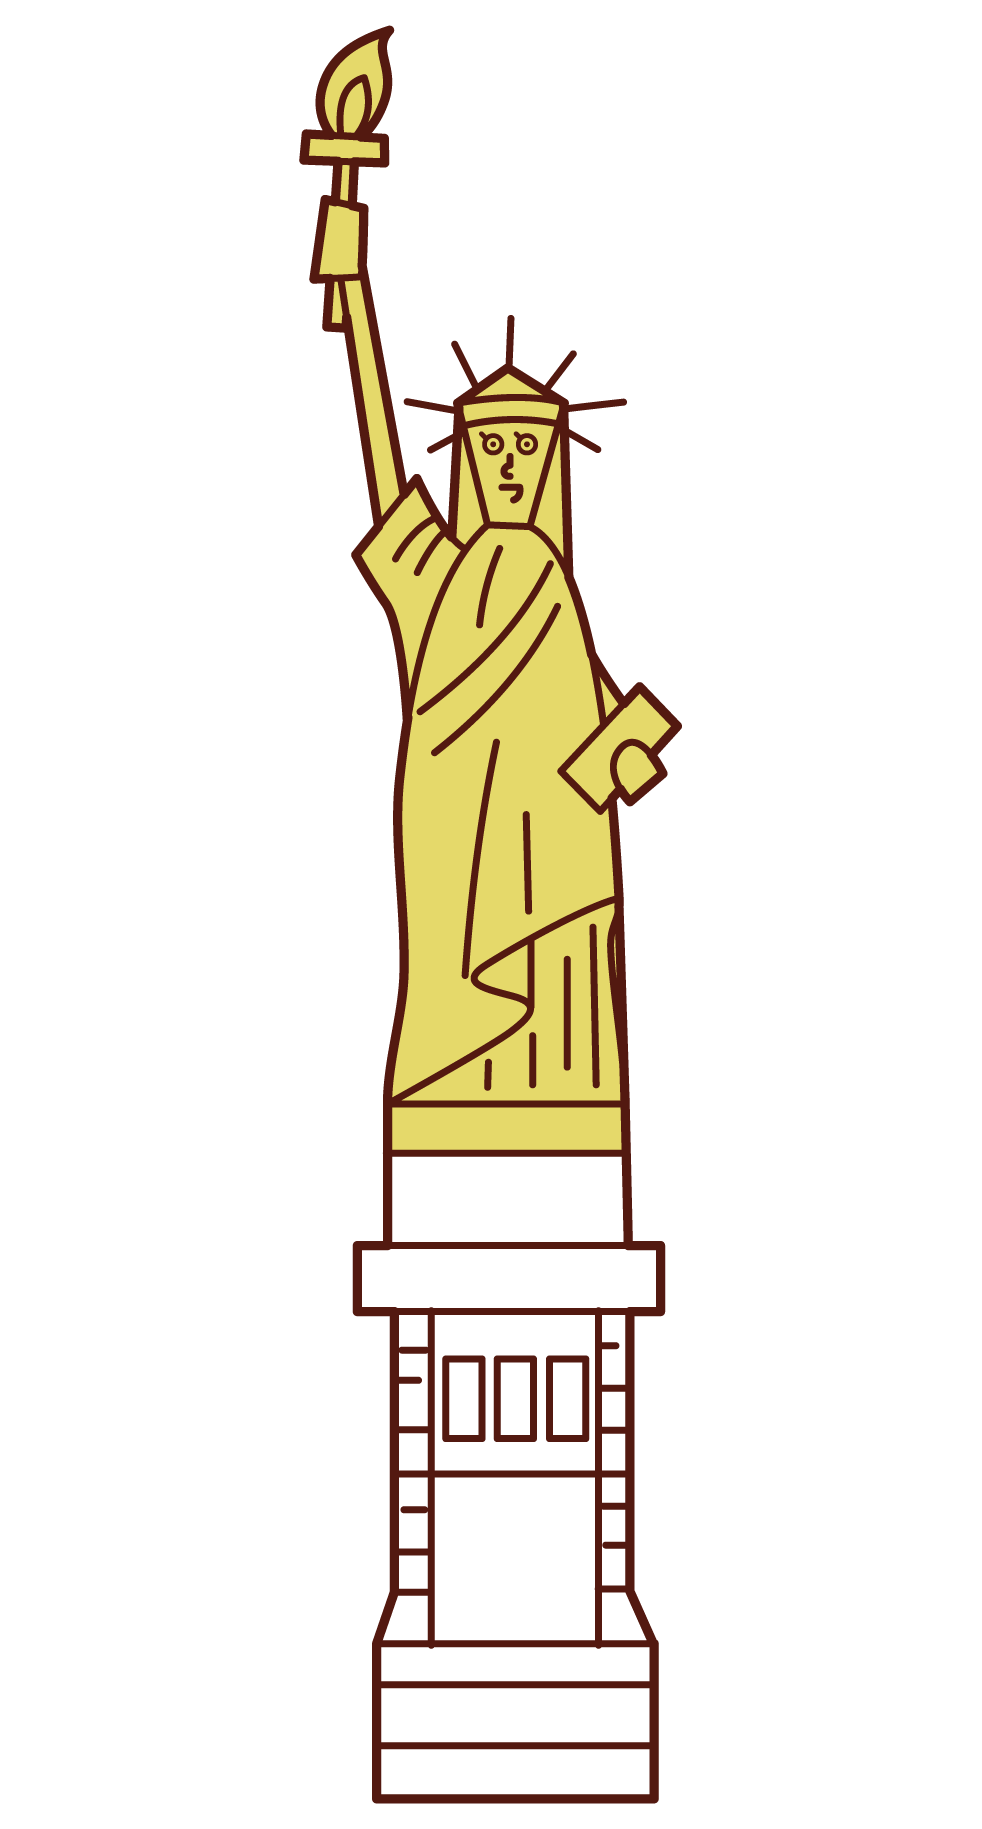 Illustration of the Statue of Liberty